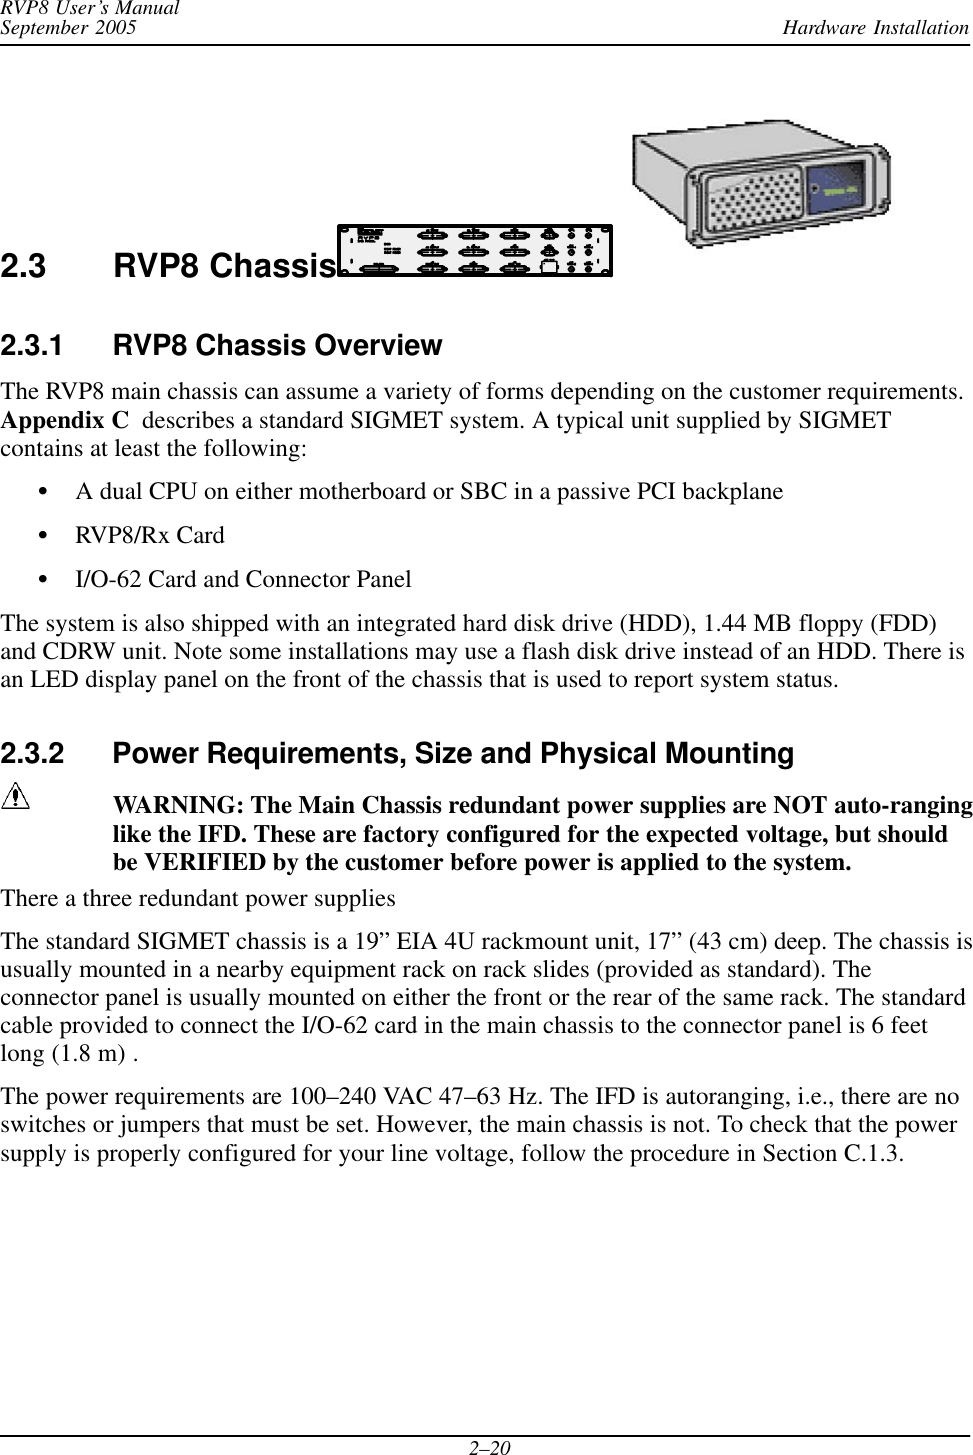 Hardware InstallationRVP8 User’s ManualSeptember 20052–202.3 RVP8 Chassis2.3.1 RVP8 Chassis OverviewThe RVP8 main chassis can assume a variety of forms depending on the customer requirements.Appendix C  describes a standard SIGMET system. A typical unit supplied by SIGMETcontains at least the following:SA dual CPU on either motherboard or SBC in a passive PCI backplaneSRVP8/Rx CardSI/O-62 Card and Connector PanelThe system is also shipped with an integrated hard disk drive (HDD), 1.44 MB floppy (FDD)and CDRW unit. Note some installations may use a flash disk drive instead of an HDD. There isan LED display panel on the front of the chassis that is used to report system status.2.3.2 Power Requirements, Size and Physical MountingWARNING: The Main Chassis redundant power supplies are NOT auto-ranginglike the IFD. These are factory configured for the expected voltage, but shouldbe VERIFIED by the customer before power is applied to the system.There a three redundant power suppliesThe standard SIGMET chassis is a 19” EIA 4U rackmount unit, 17” (43 cm) deep. The chassis isusually mounted in a nearby equipment rack on rack slides (provided as standard). Theconnector panel is usually mounted on either the front or the rear of the same rack. The standardcable provided to connect the I/O-62 card in the main chassis to the connector panel is 6 feetlong (1.8 m) .The power requirements are 100–240 VAC 47–63 Hz. The IFD is autoranging, i.e., there are noswitches or jumpers that must be set. However, the main chassis is not. To check that the powersupply is properly configured for your line voltage, follow the procedure in Section C.1.3.